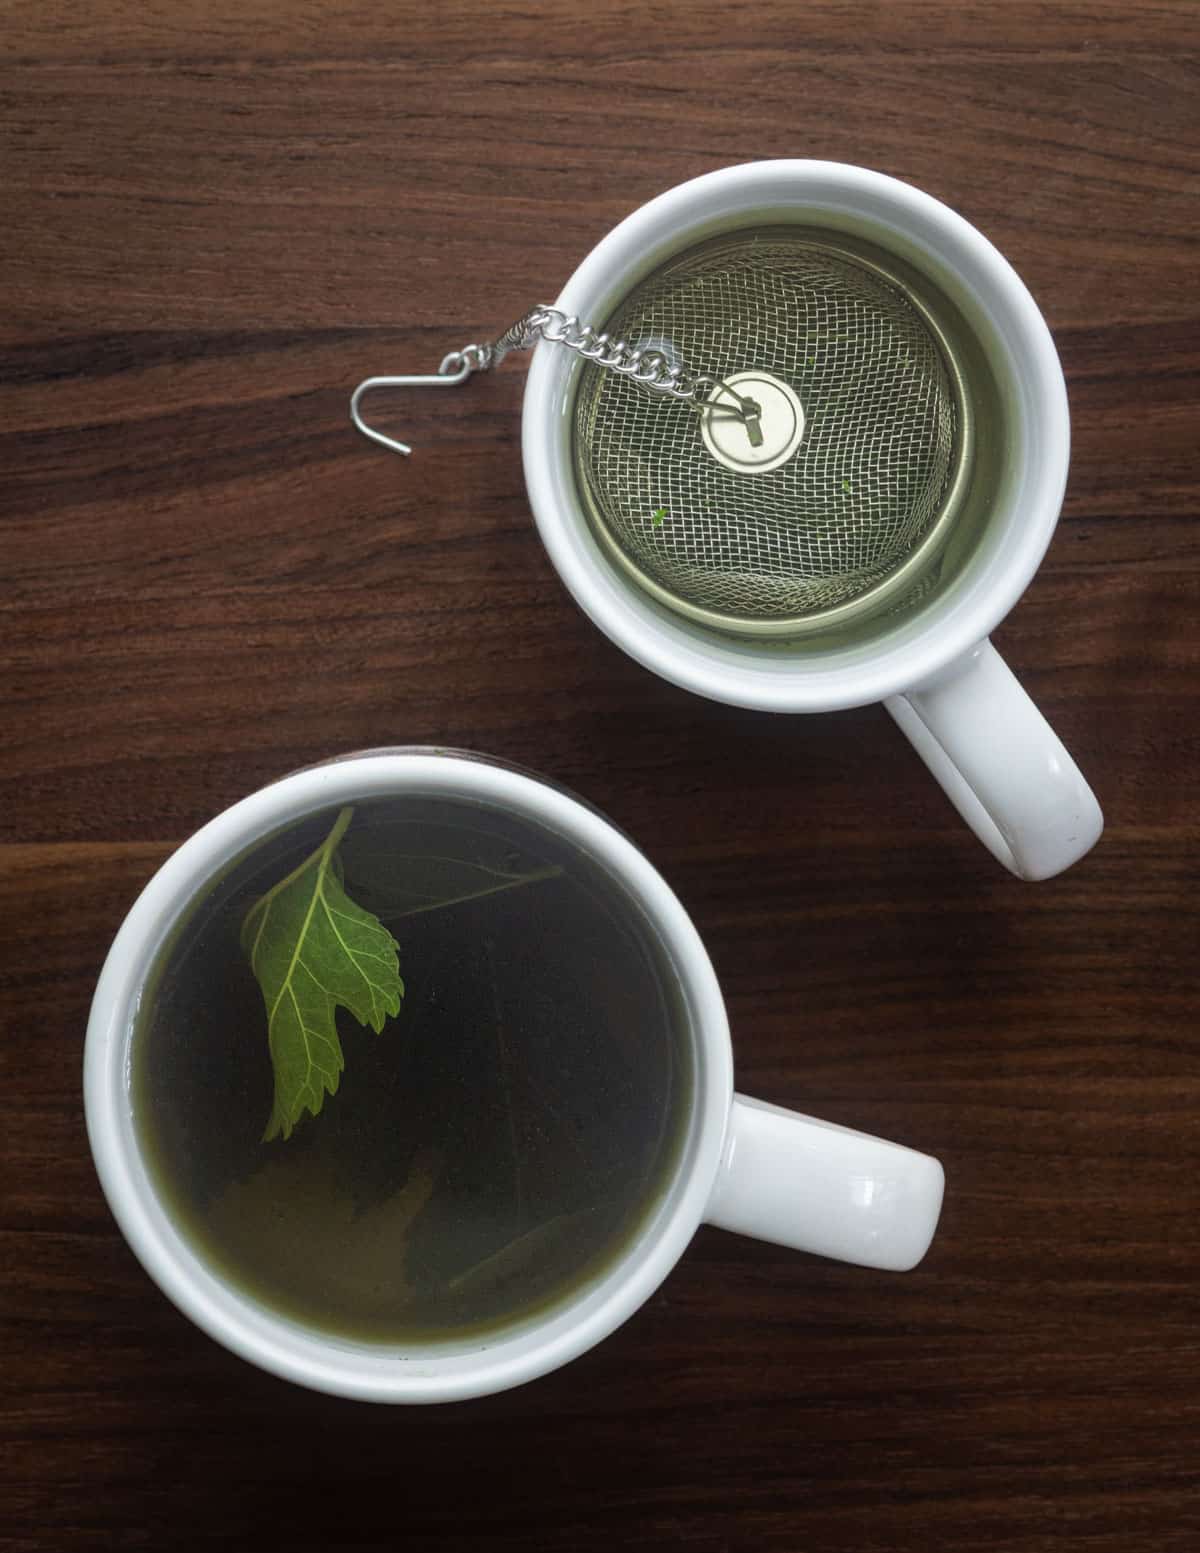 A glass of white mulberry leaf tea made with dried leaves and a mug of tea made from fresh mulberry leaves.